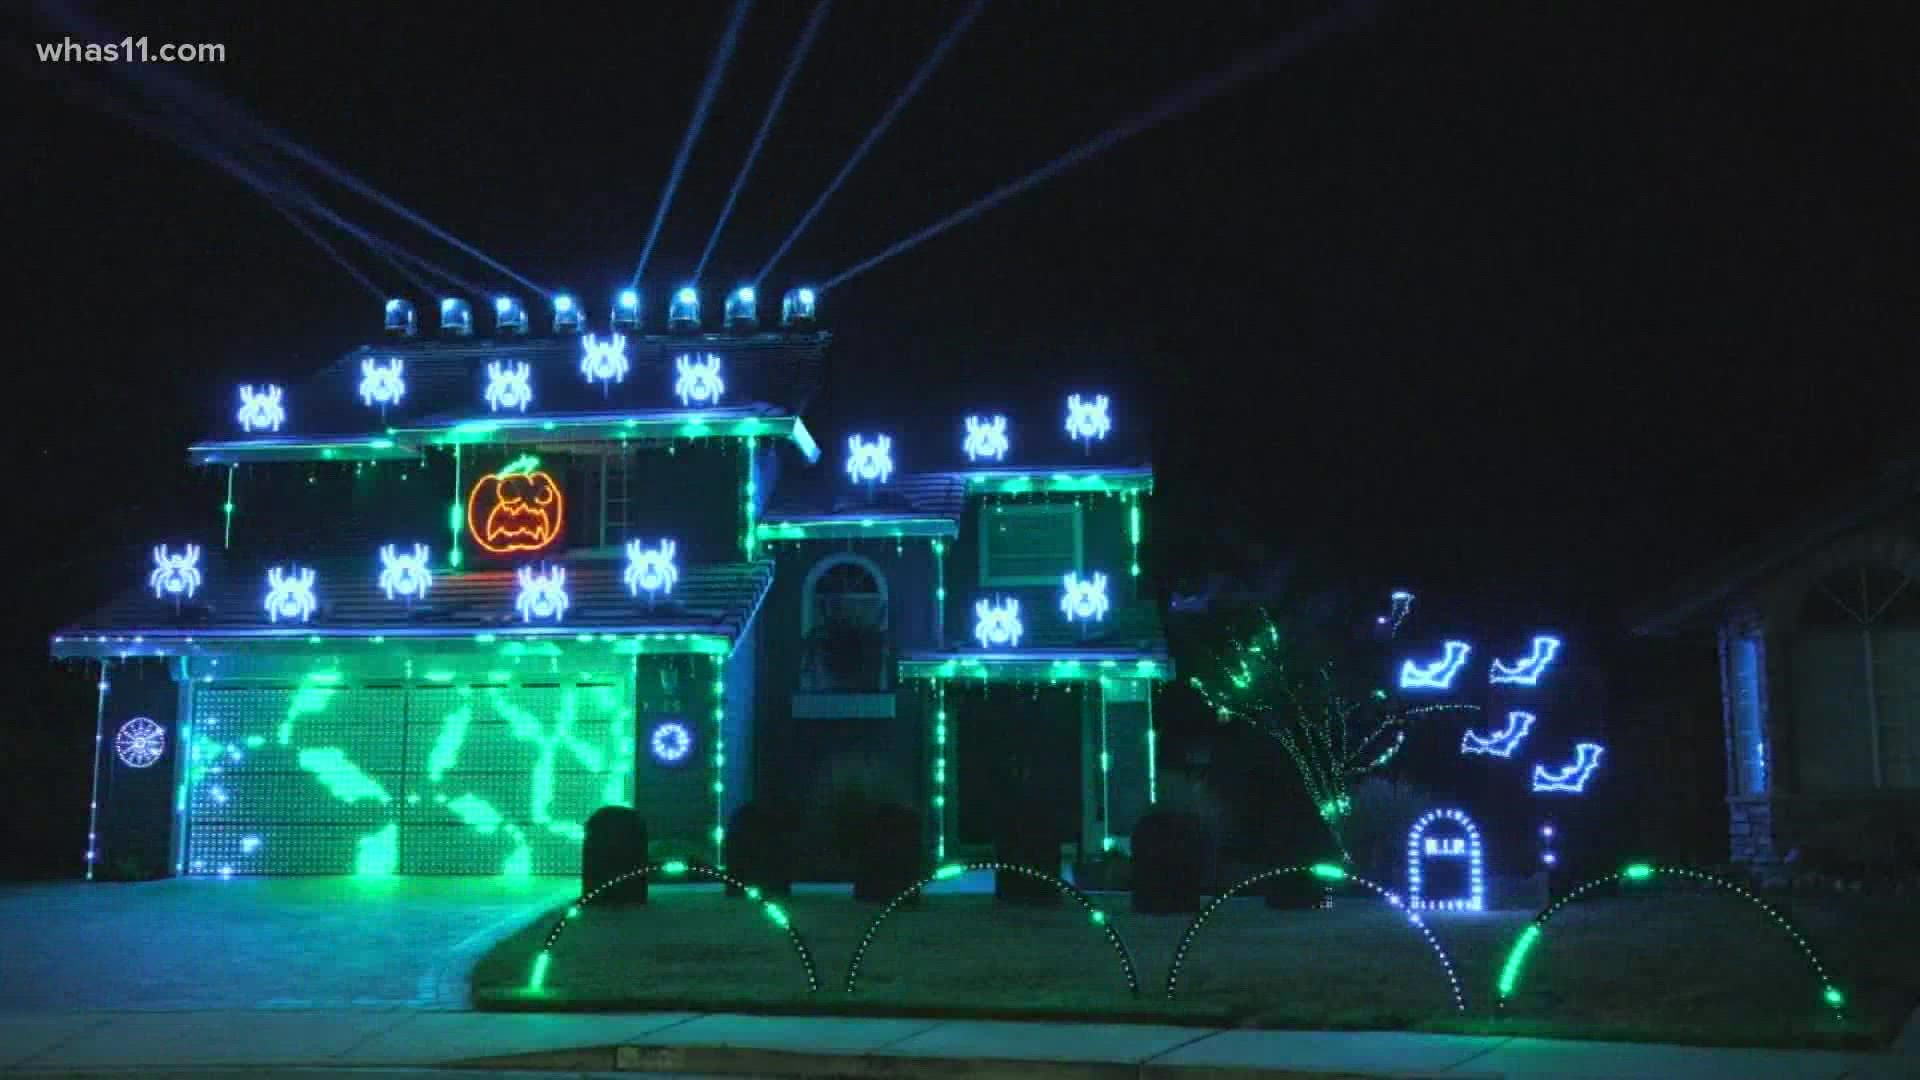 California man believes it lighting it up for trick or treaters during Halloween. He spends 350 hours of work to synch a light display to music.